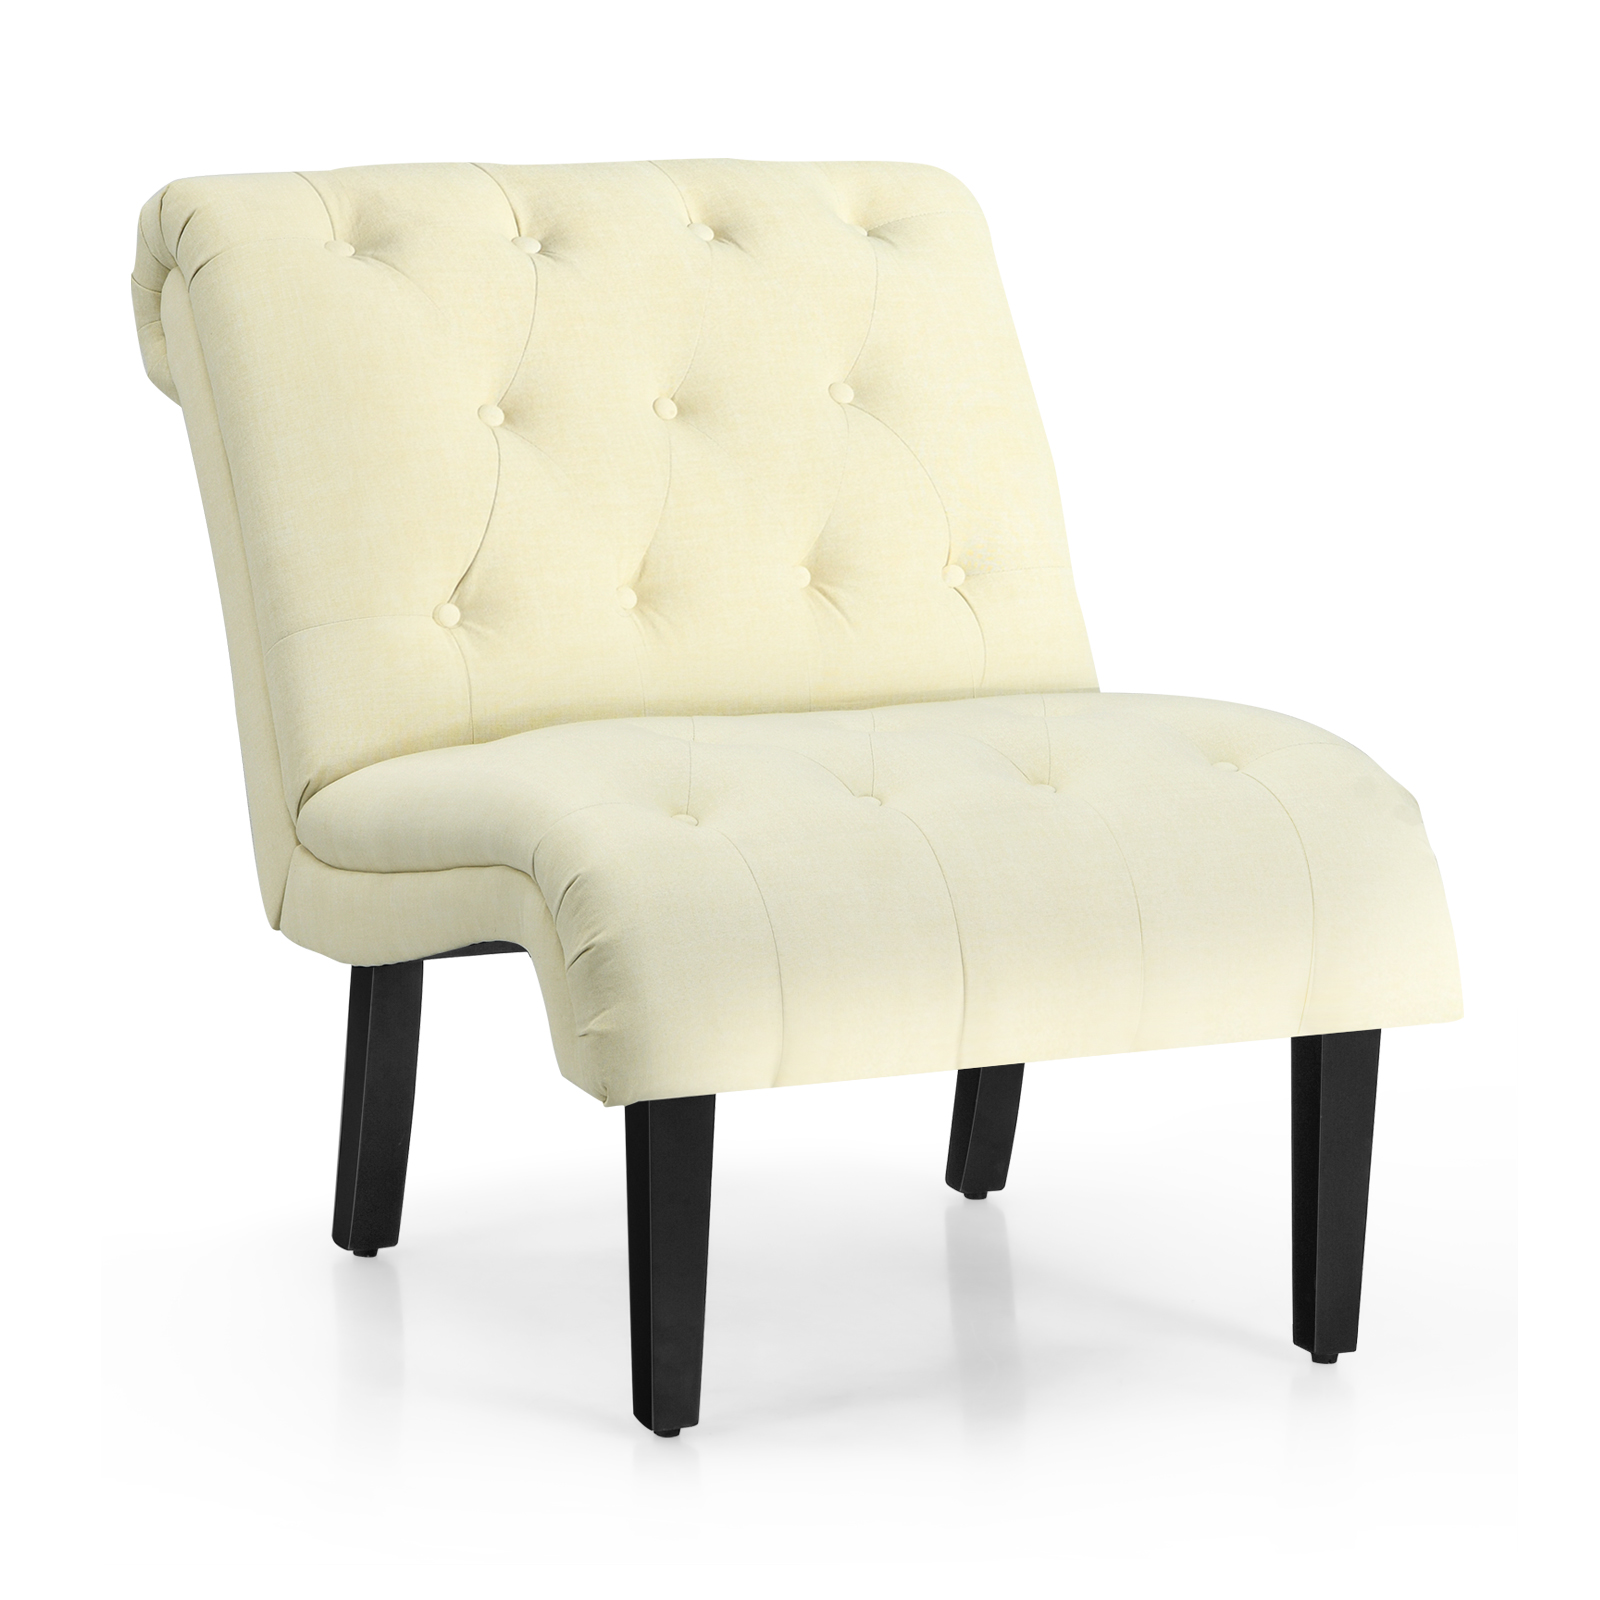 Modern_Upholstered_Accent_Chair_with_Button_Tufted_Linen_Fabric_Beige-1.jpg